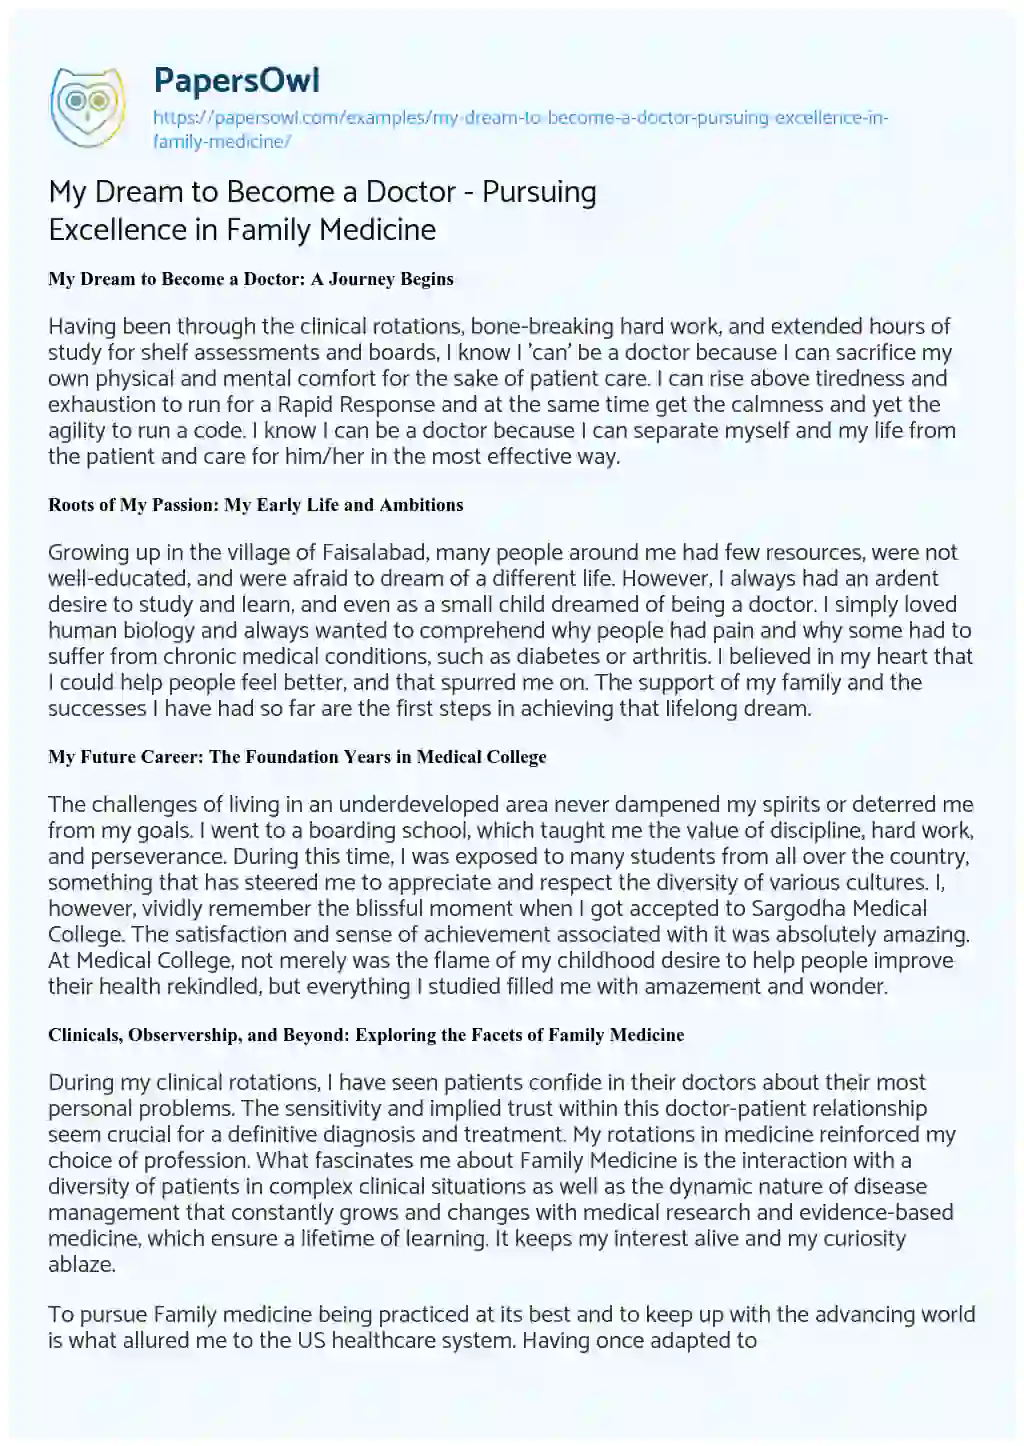 Essay on My Dream to Become a Doctor – Pursuing Excellence in Family Medicine